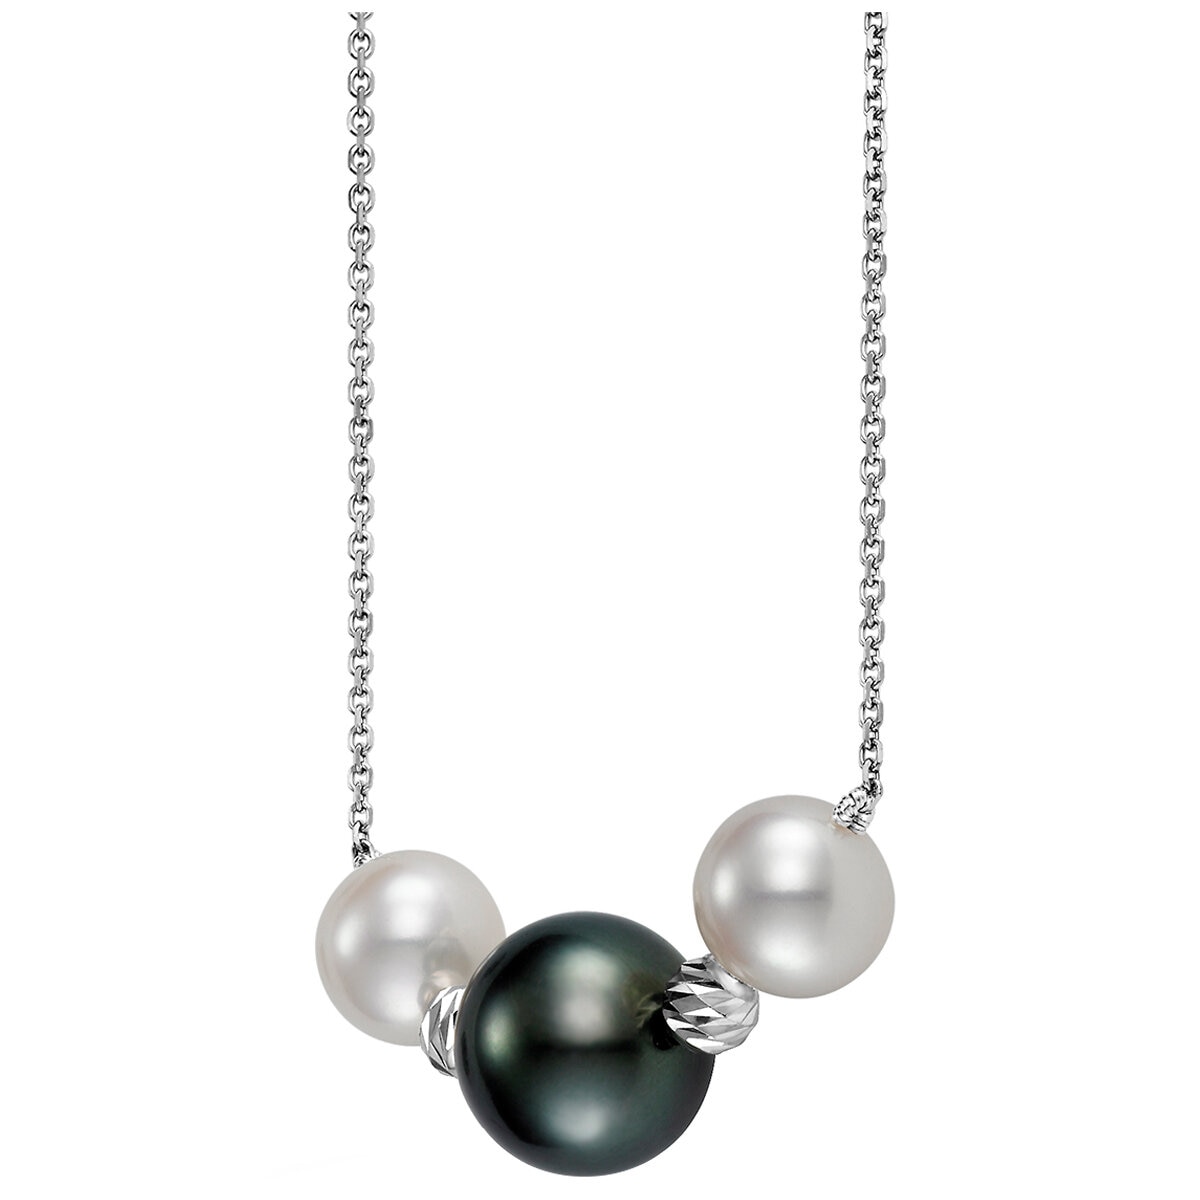 14KT White Gold 8-9mm Cultured Freshwater And 10-11mm Cultured Saltwater Tahitian Pearls And Diamond Cut Bead Necklace